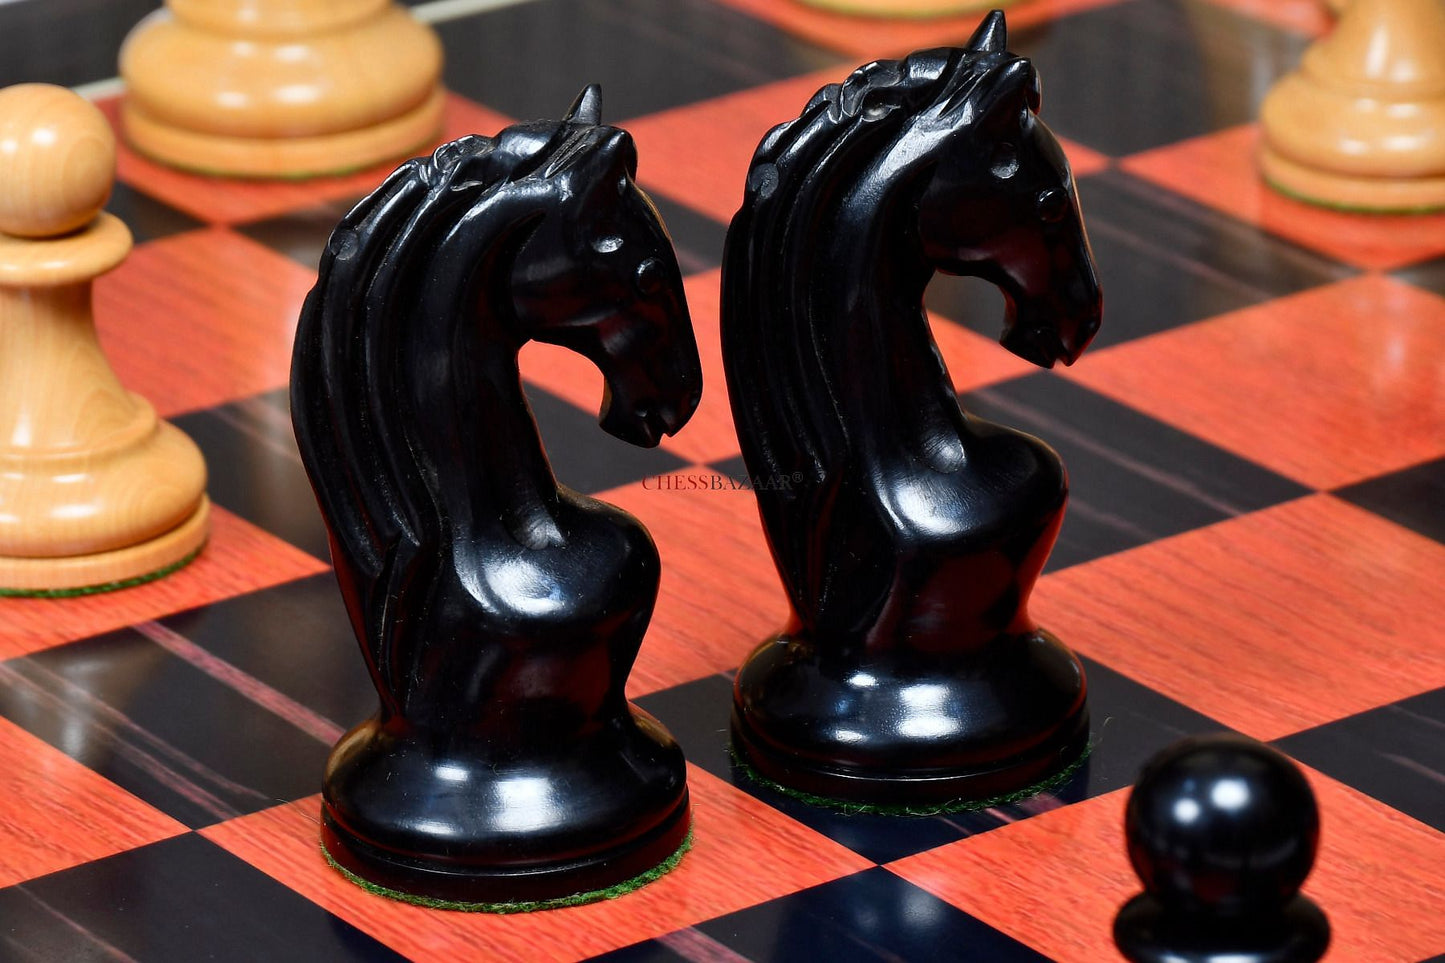 Reproduced 1963-1966 Piatigorsky Cup Chess Pieces in Ebony / Box Wood - 4.2" King